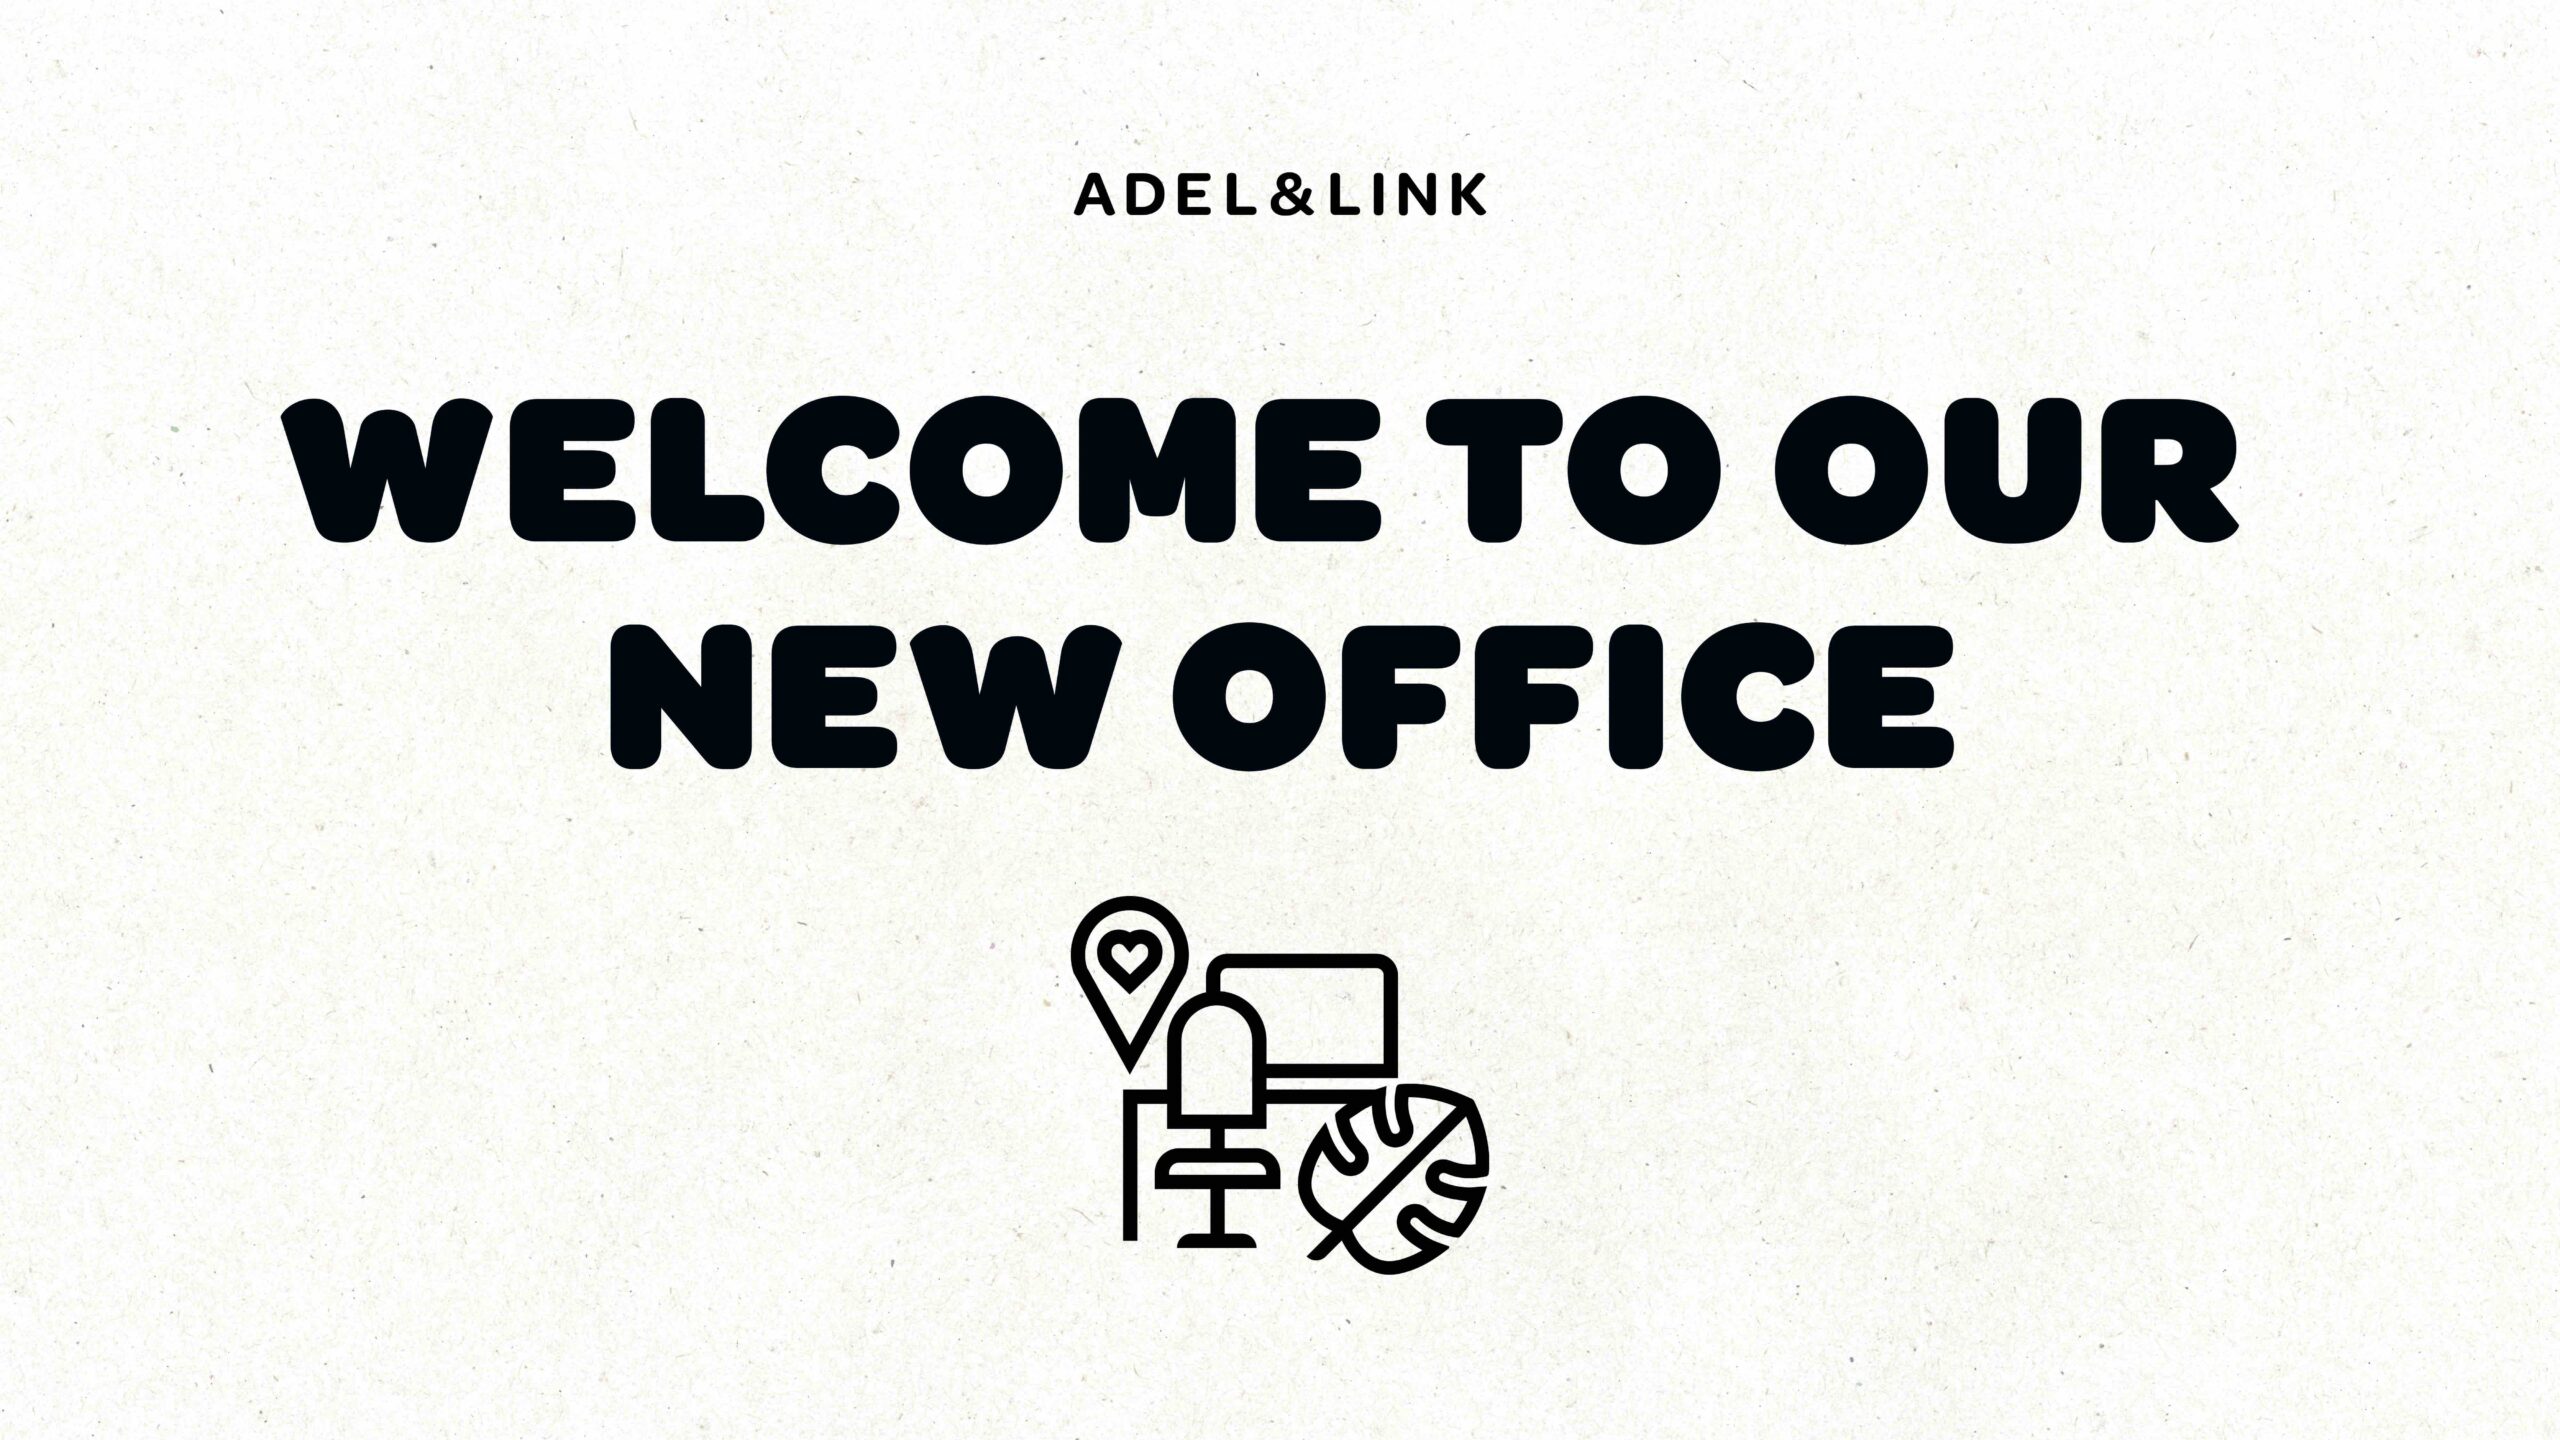 Grafik mit Text "Welcome to our new office"